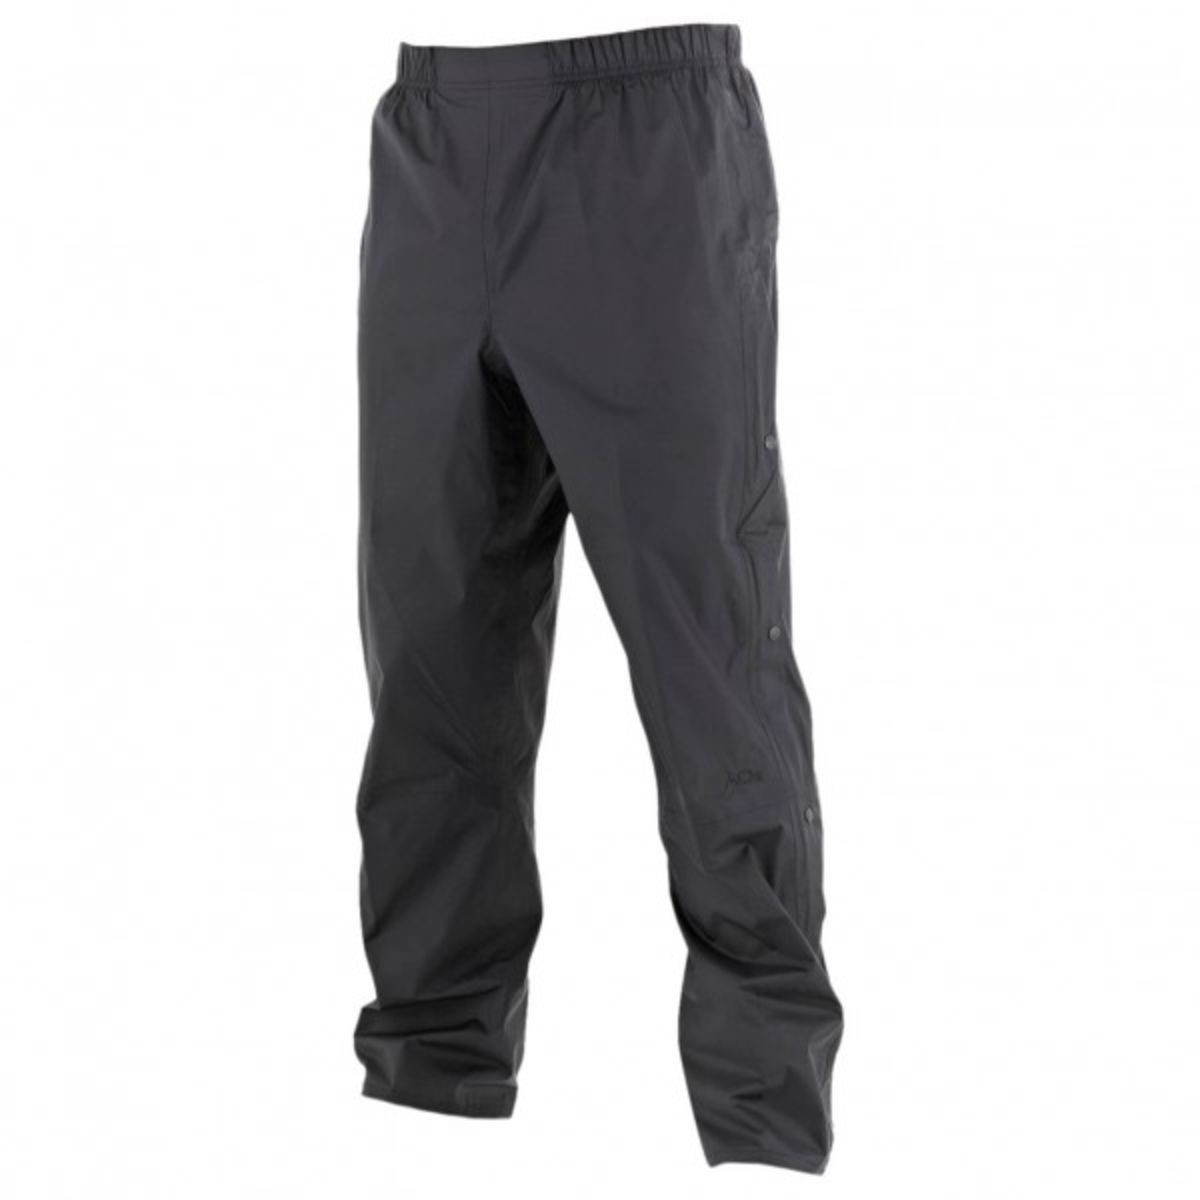 Buy Berghaus Women's Deluge Overtrousers from £40.40 (Today) – Best Deals  on